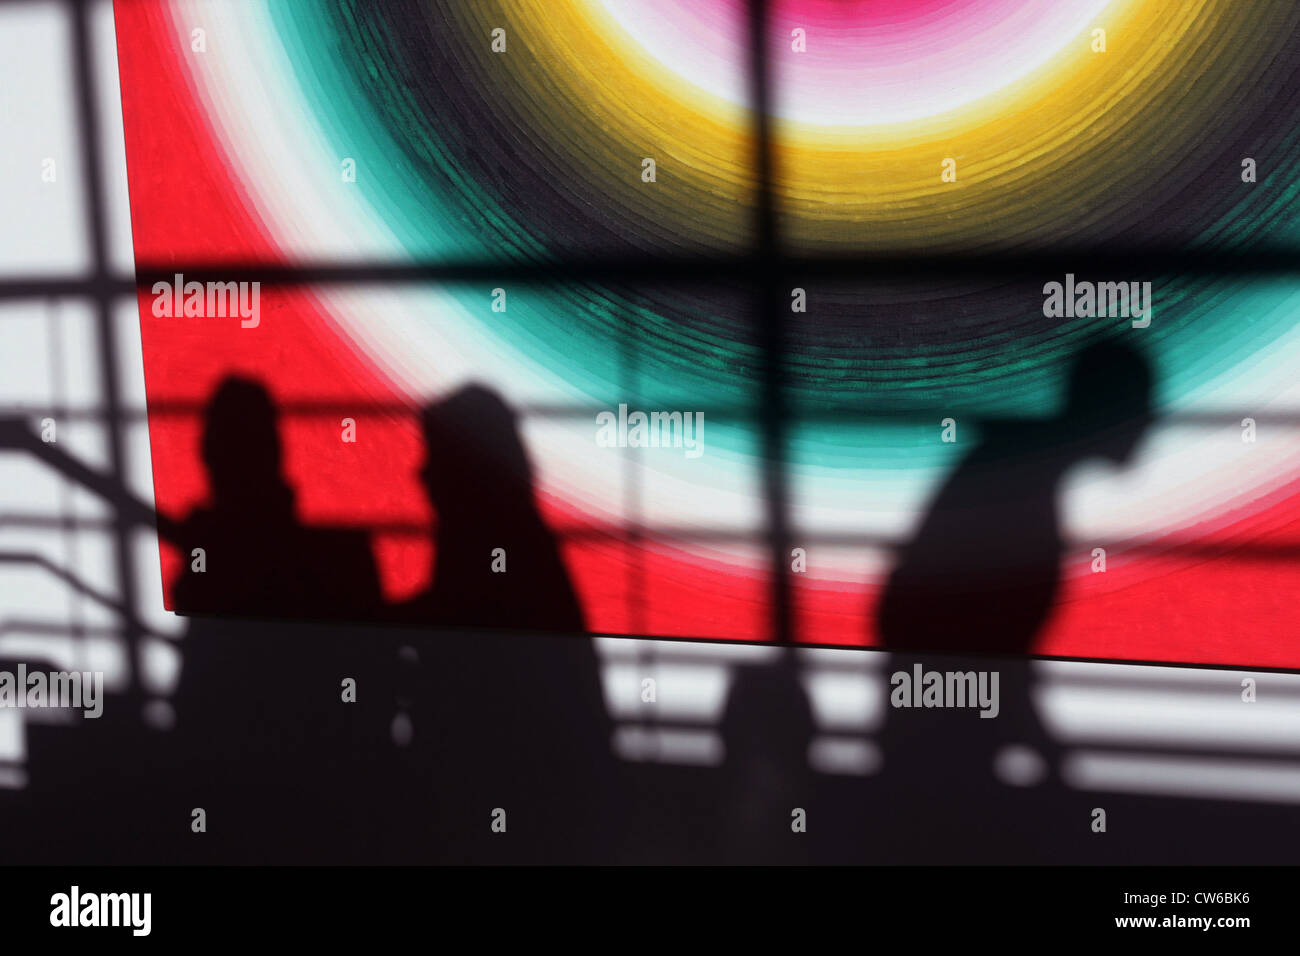 Beijing, silhouettes of people on a colored background Stock Photo